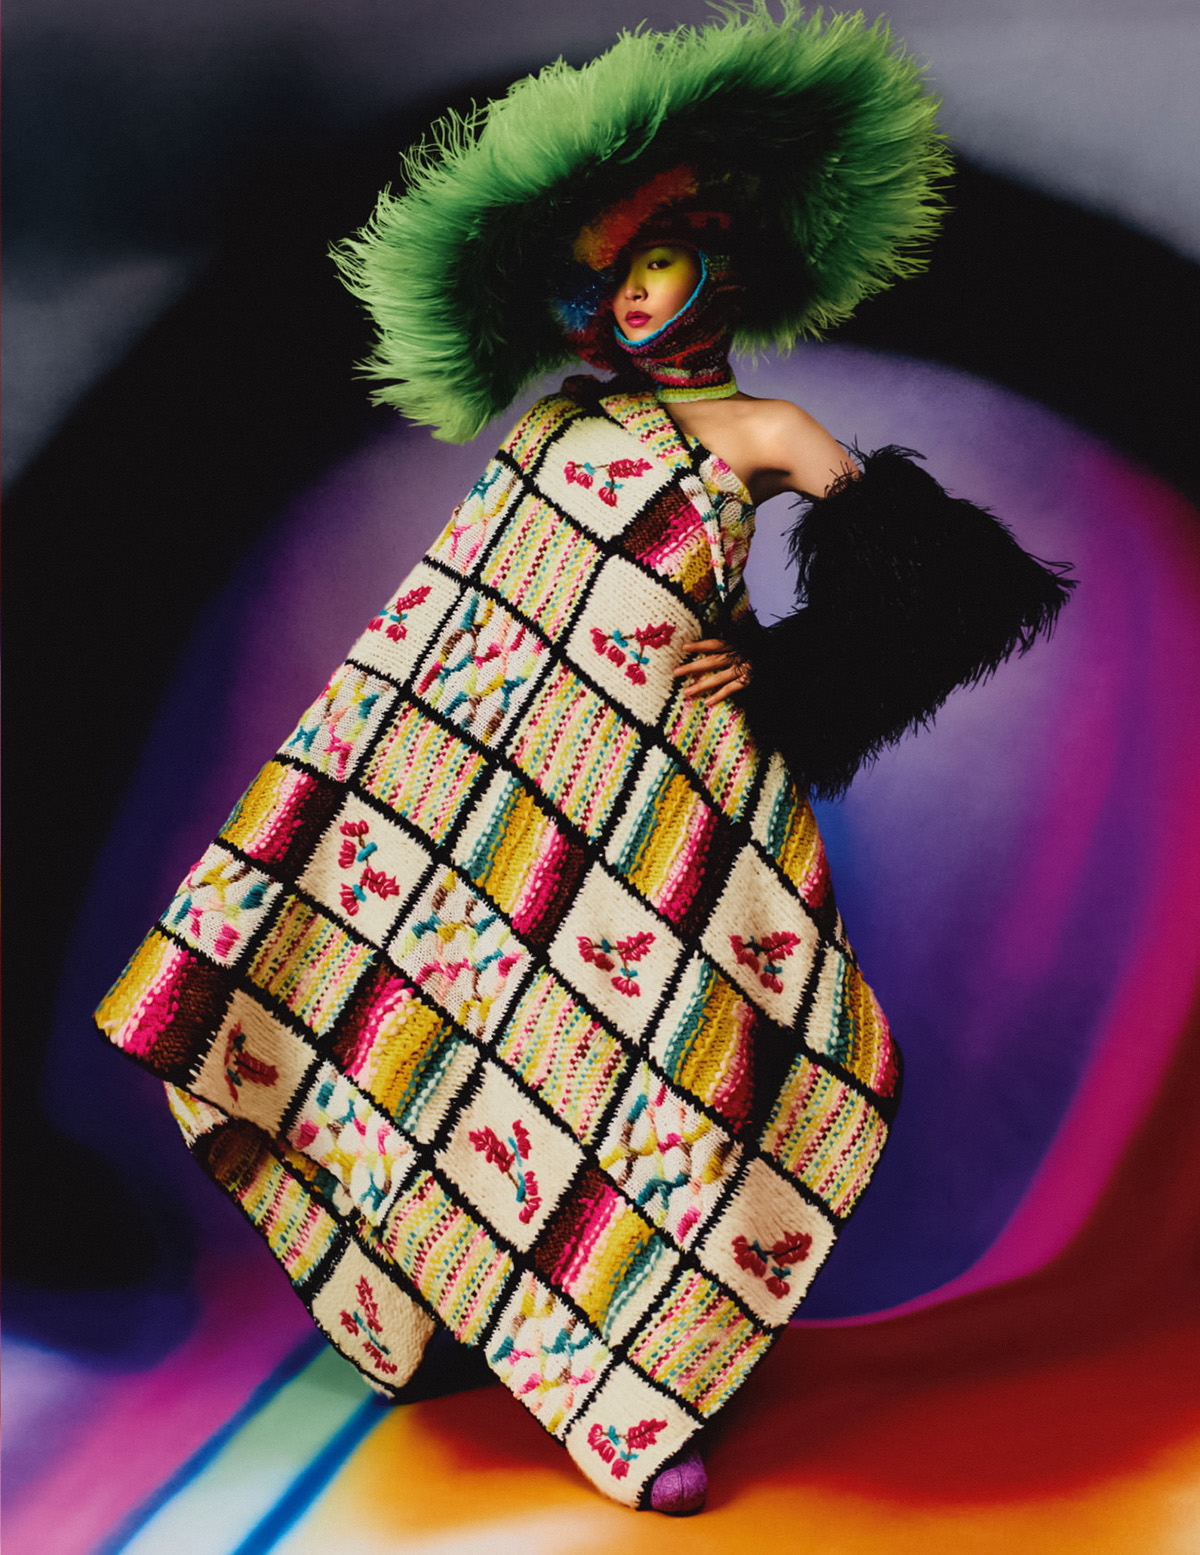 ''It's A Trip'' by Rafael Pavarotti for Vogue Global December 2021